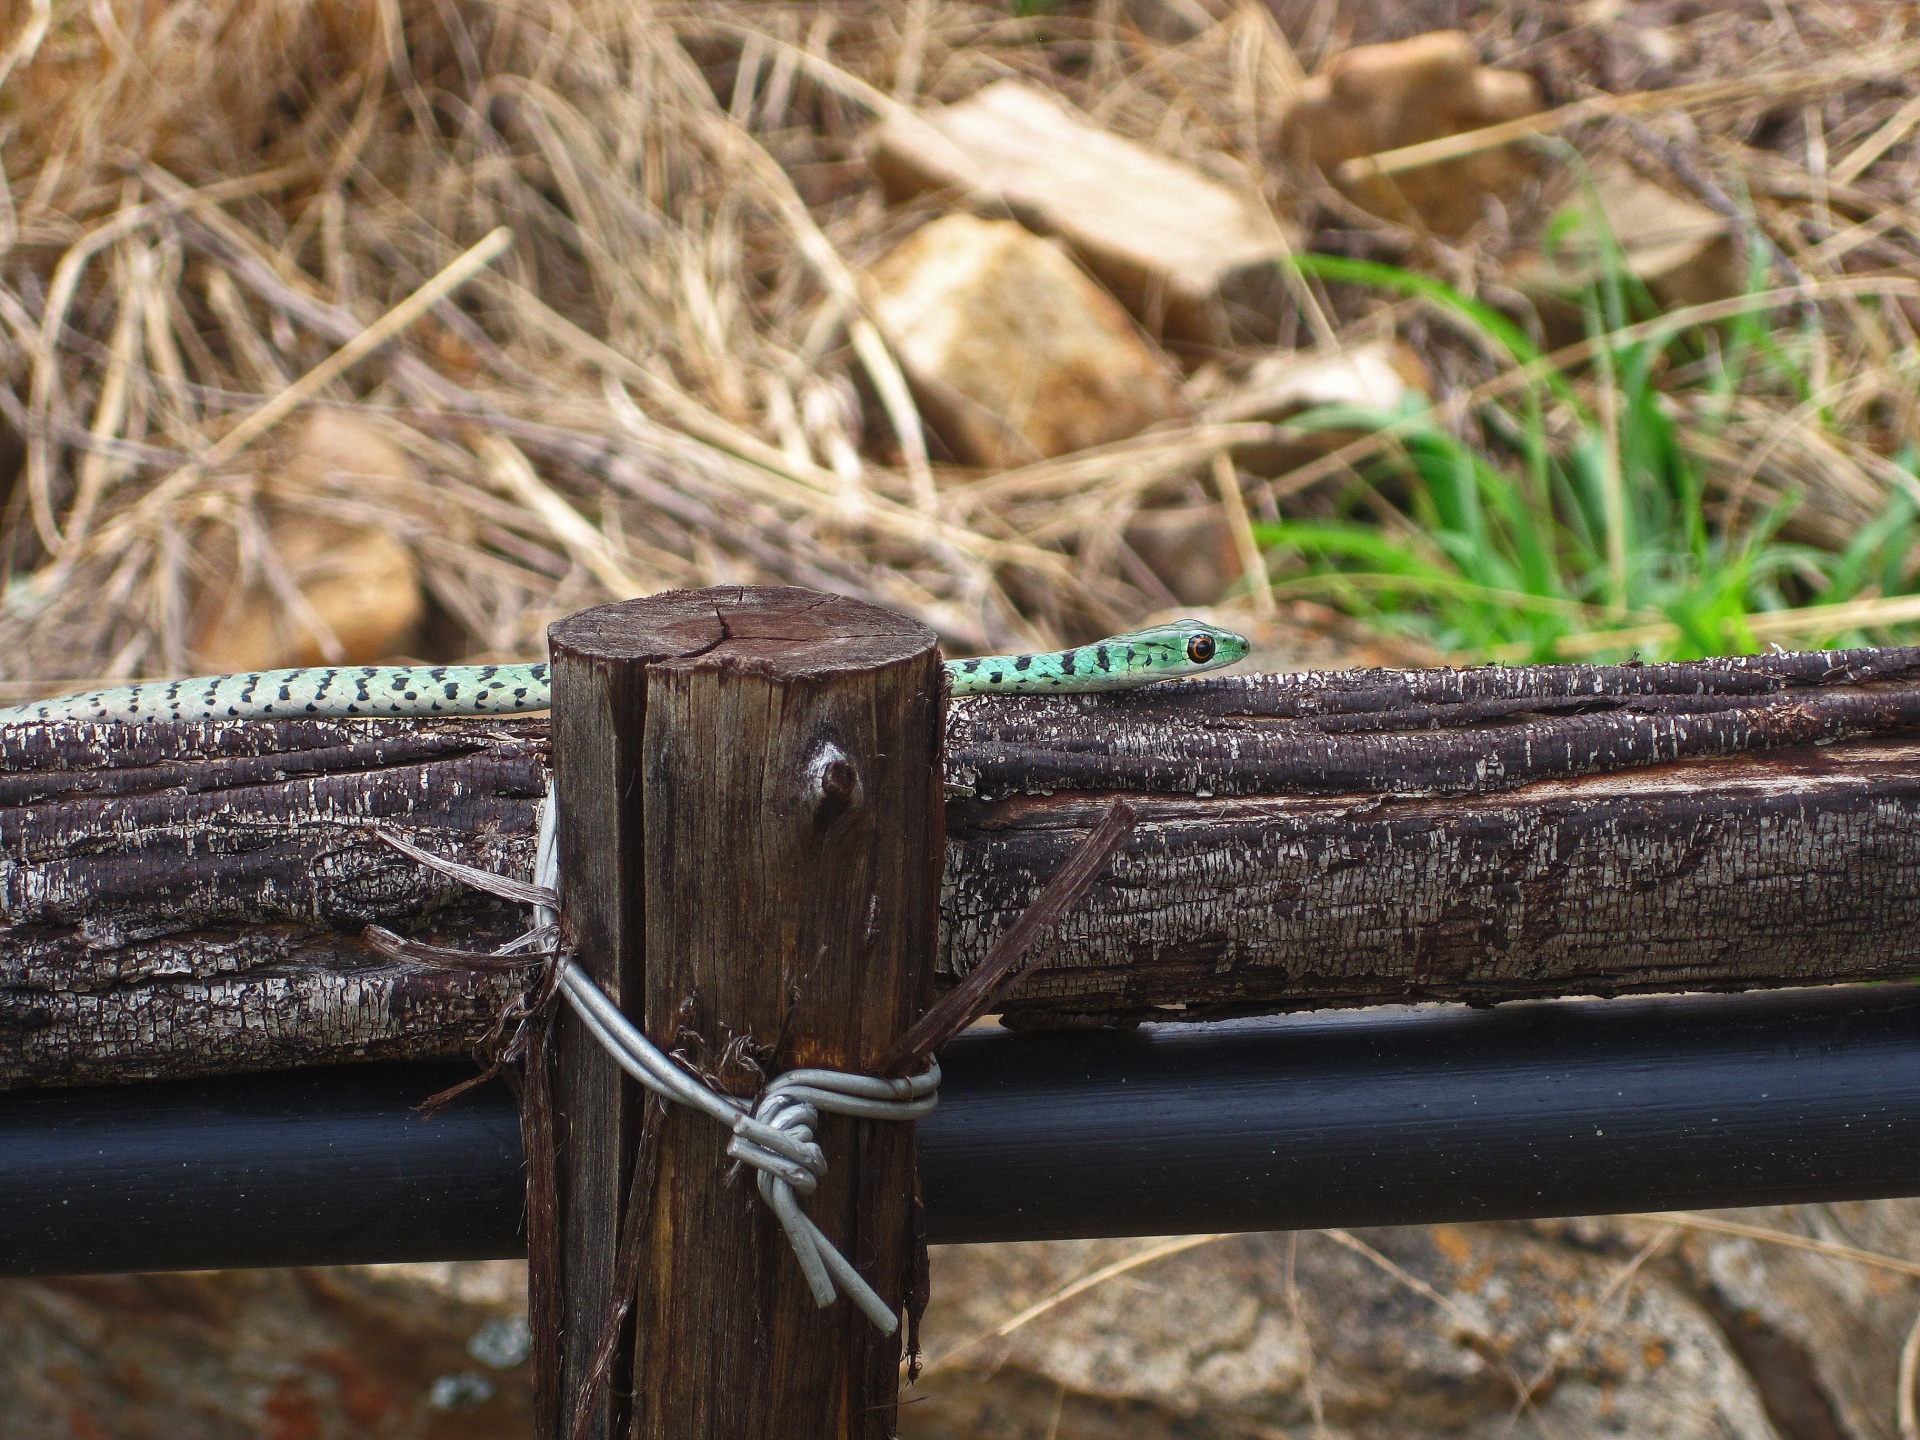 View Of Spotted Bush Snake